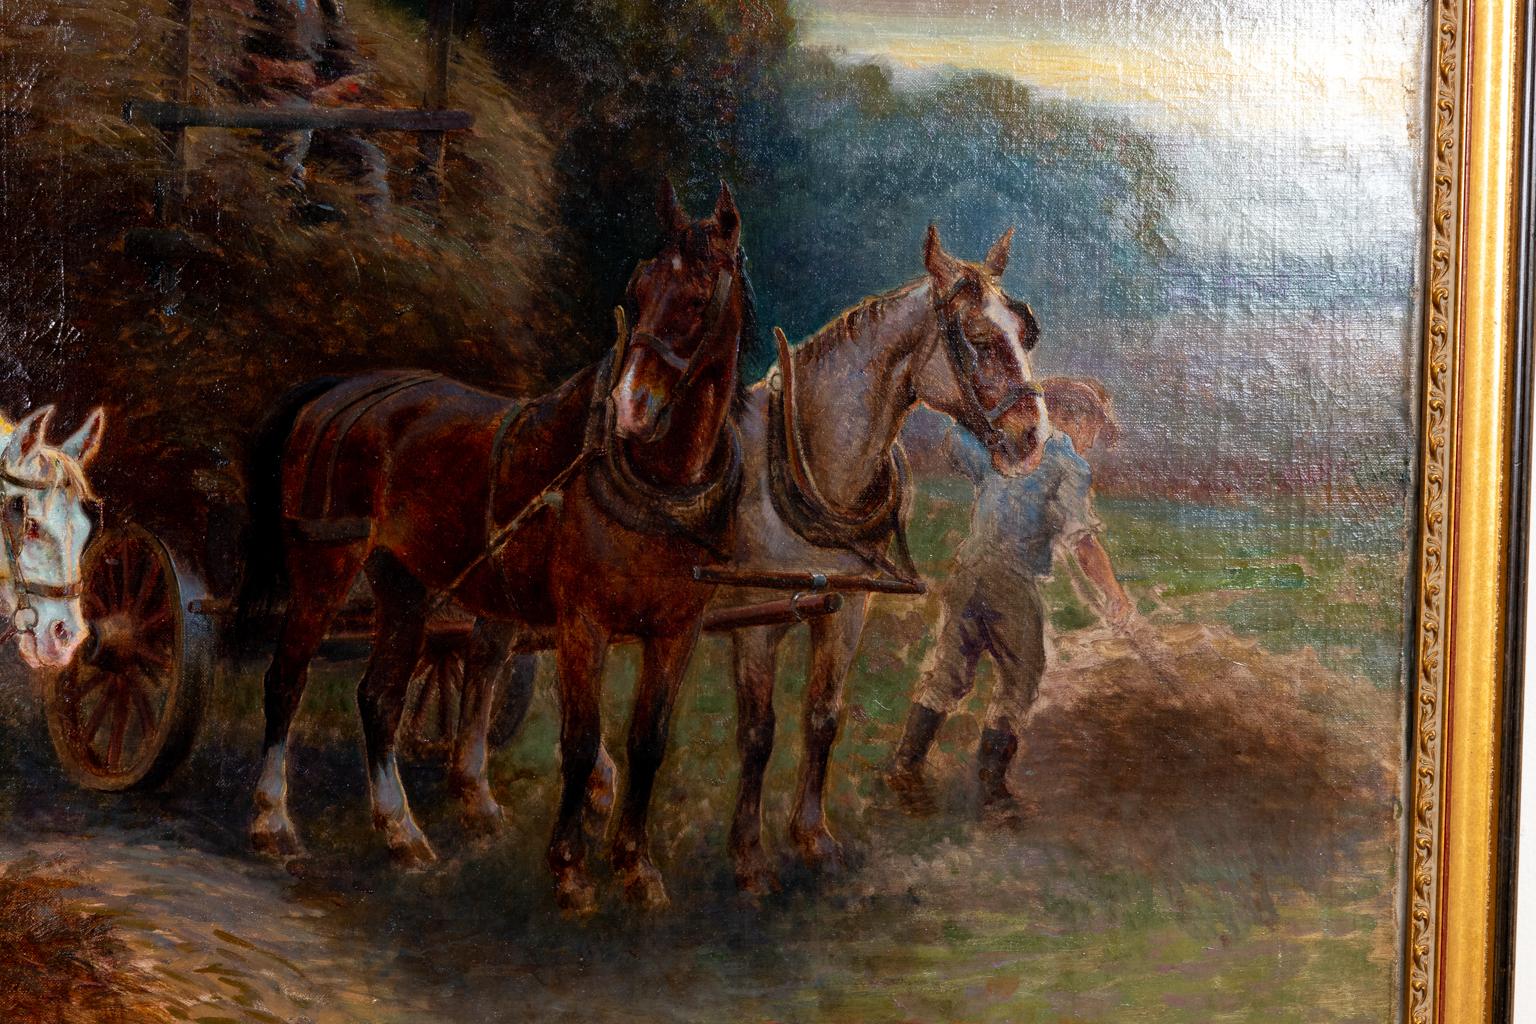 Circa 19th century framed Barbizon School painting of hay making in the medium oil on canvas. Made in France. Please note of wear consistent with age.